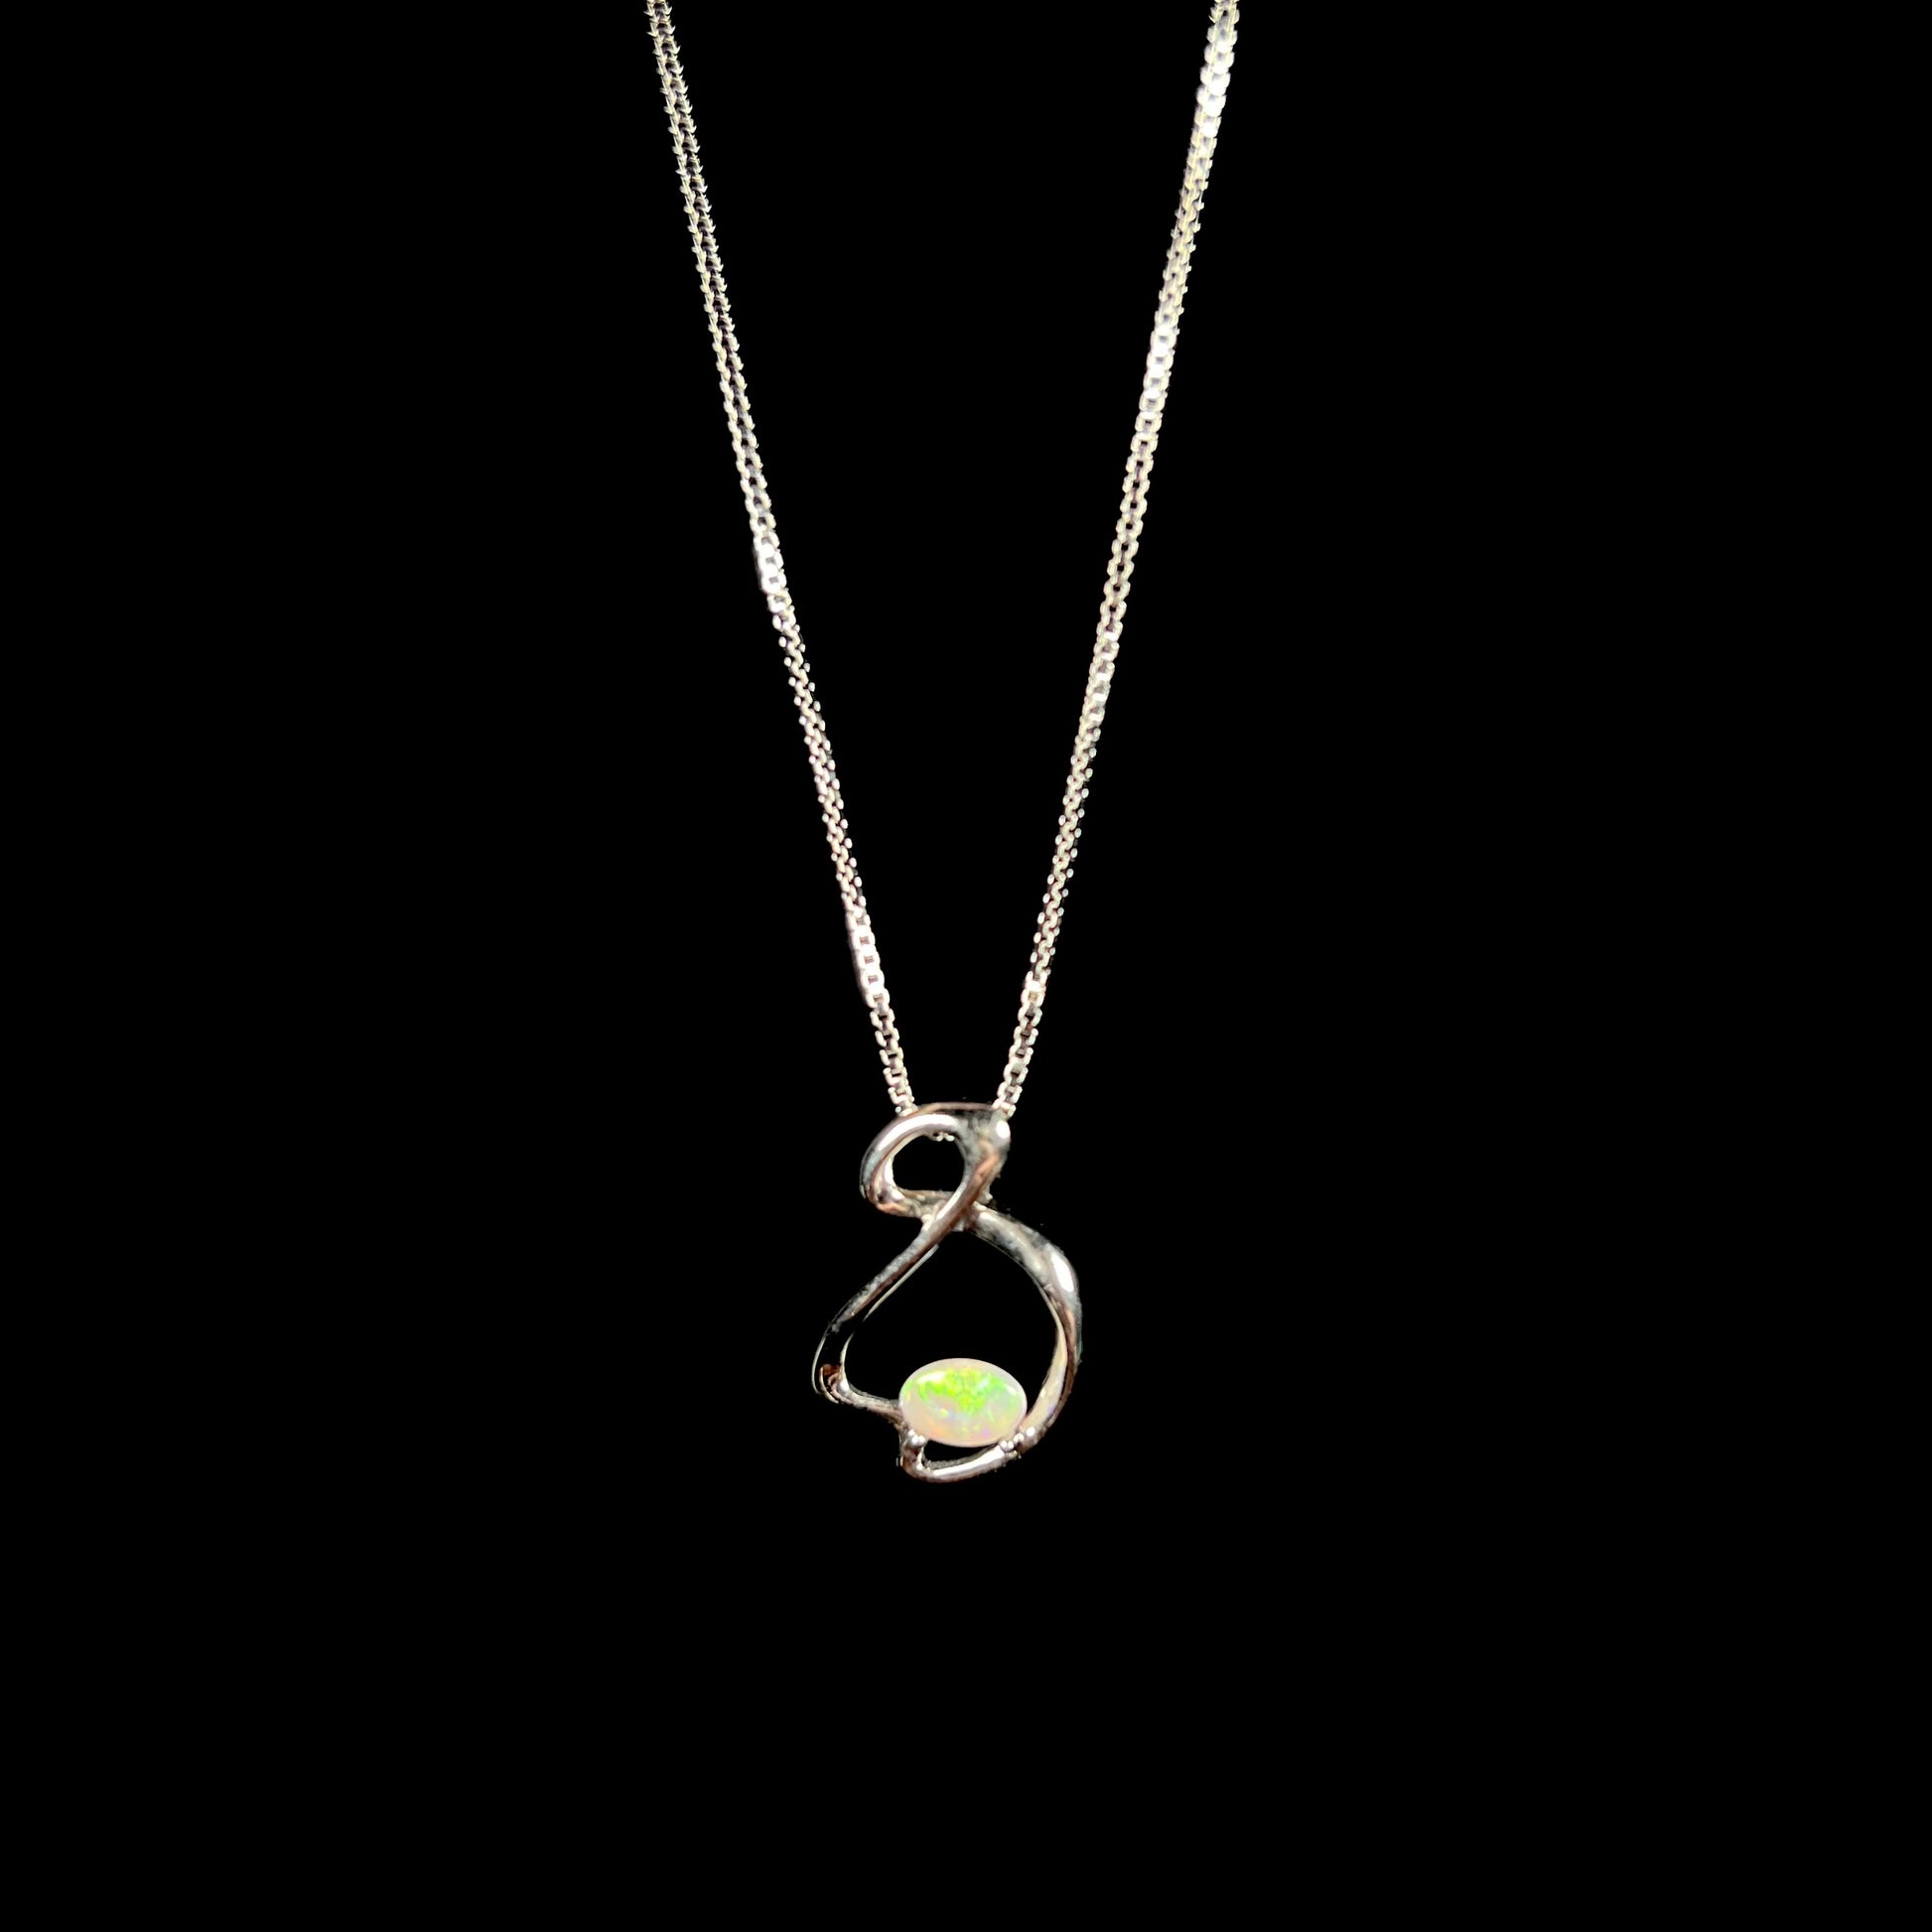 A ladies' sterling silver necklace set with an oval cabochon cut natural white crystal opal with green fire.